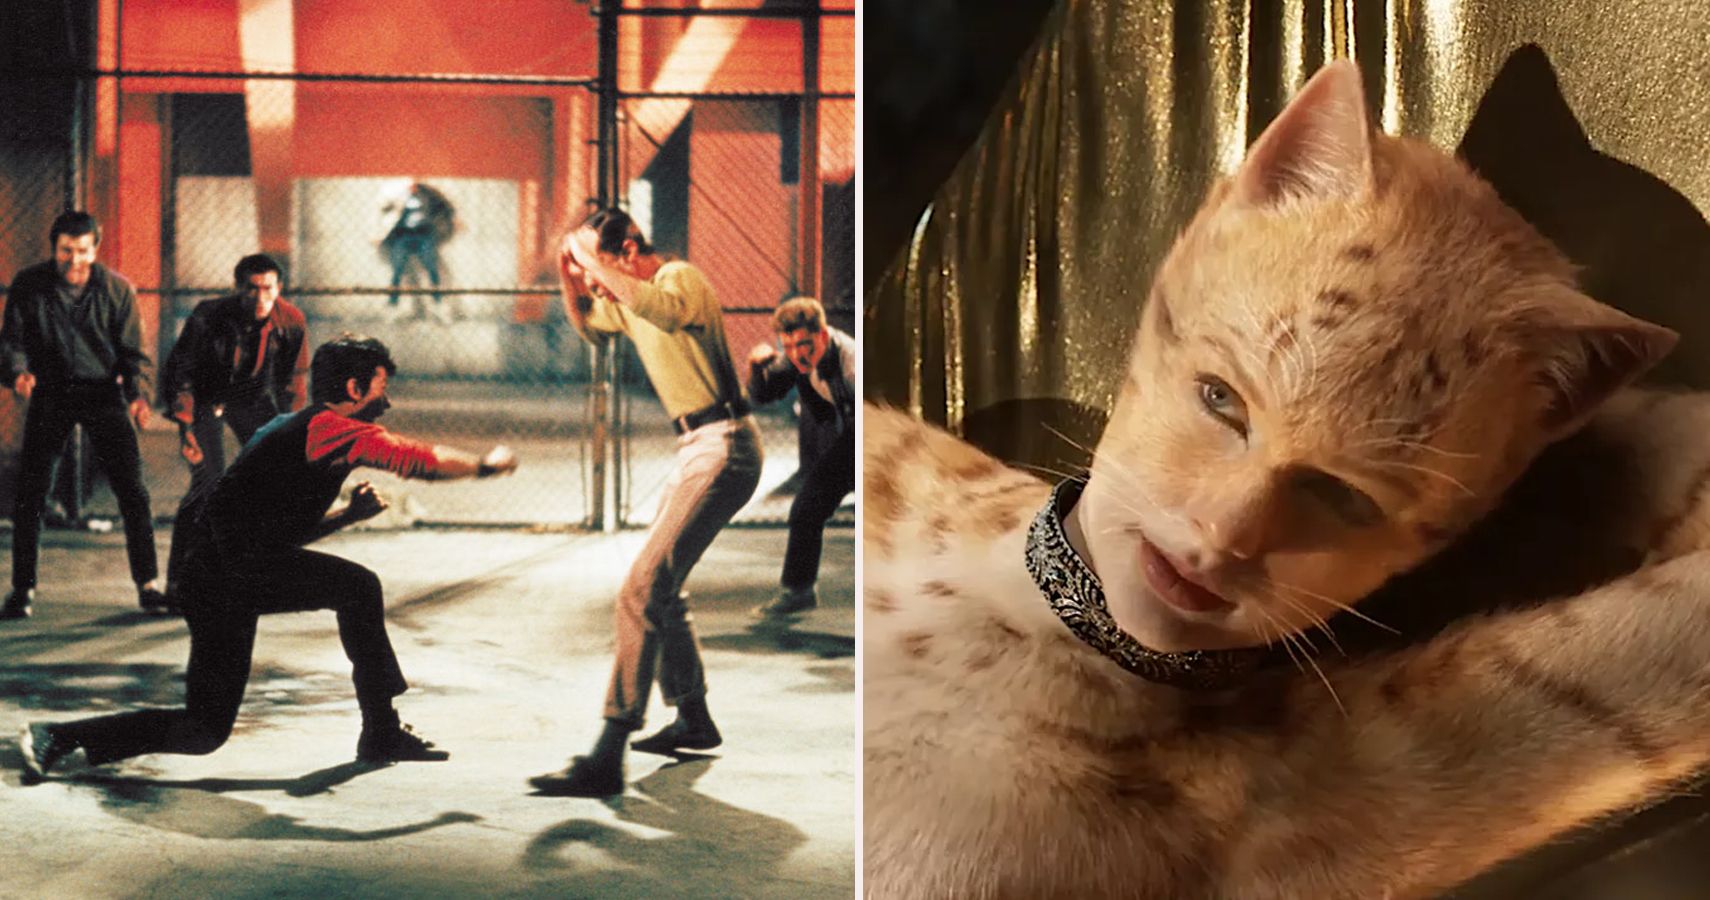 The 5 Best & 5 Worst Film Adaptations Of Hit Broadway Musicals (Including Cats) According to Rotten Tomatoes